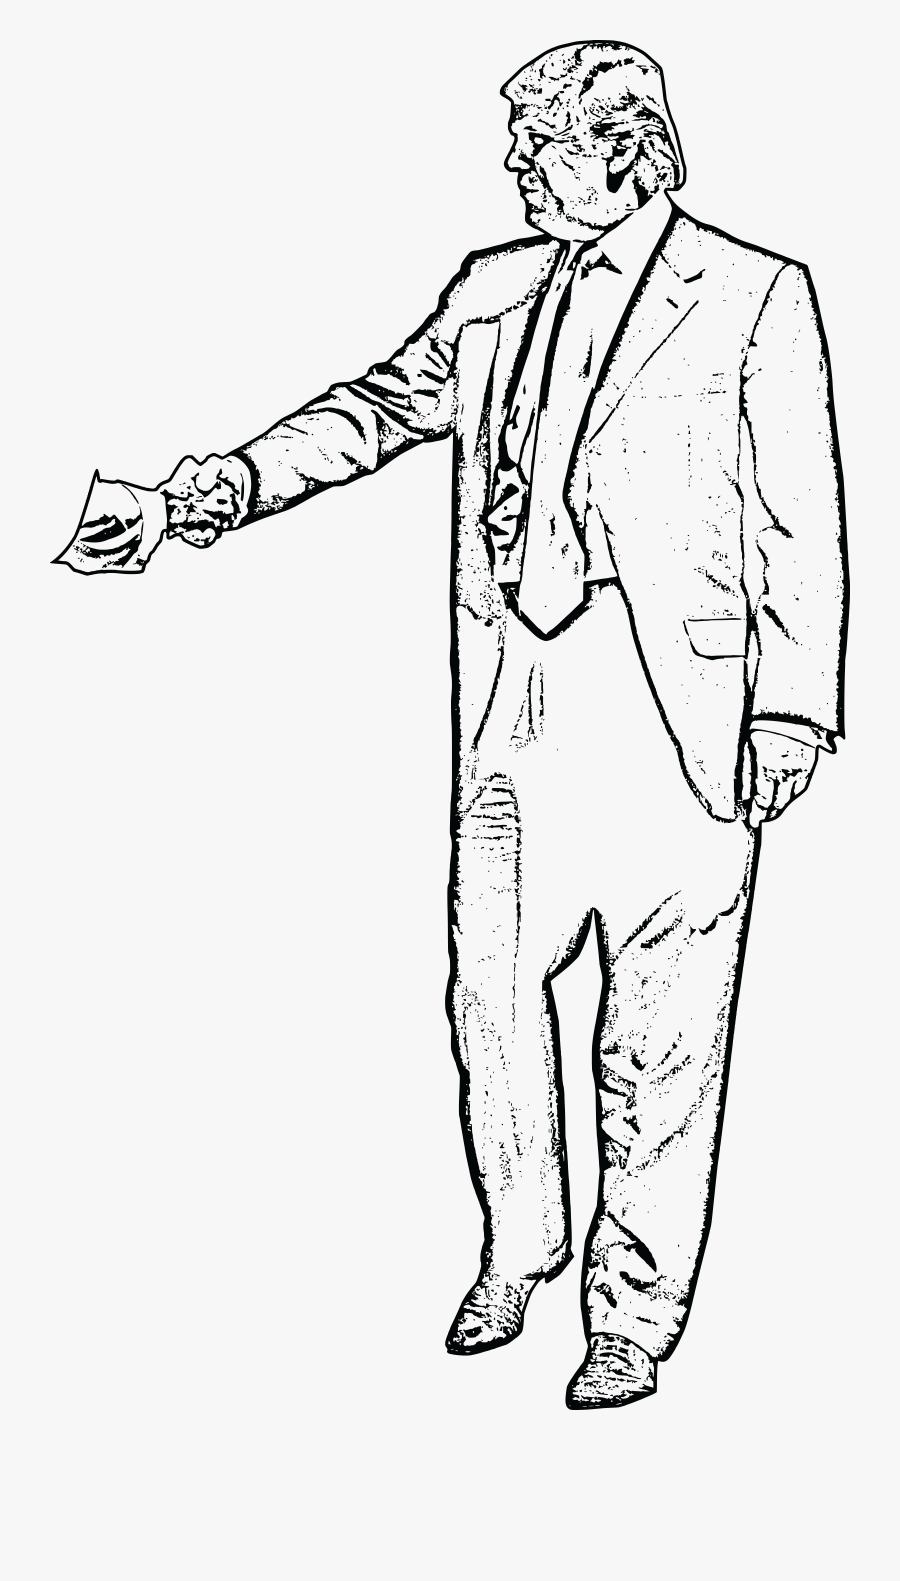 Free Clipart Of Donald Trump Shaking Hands - Donald Trump Black And White Outline, Transparent Clipart